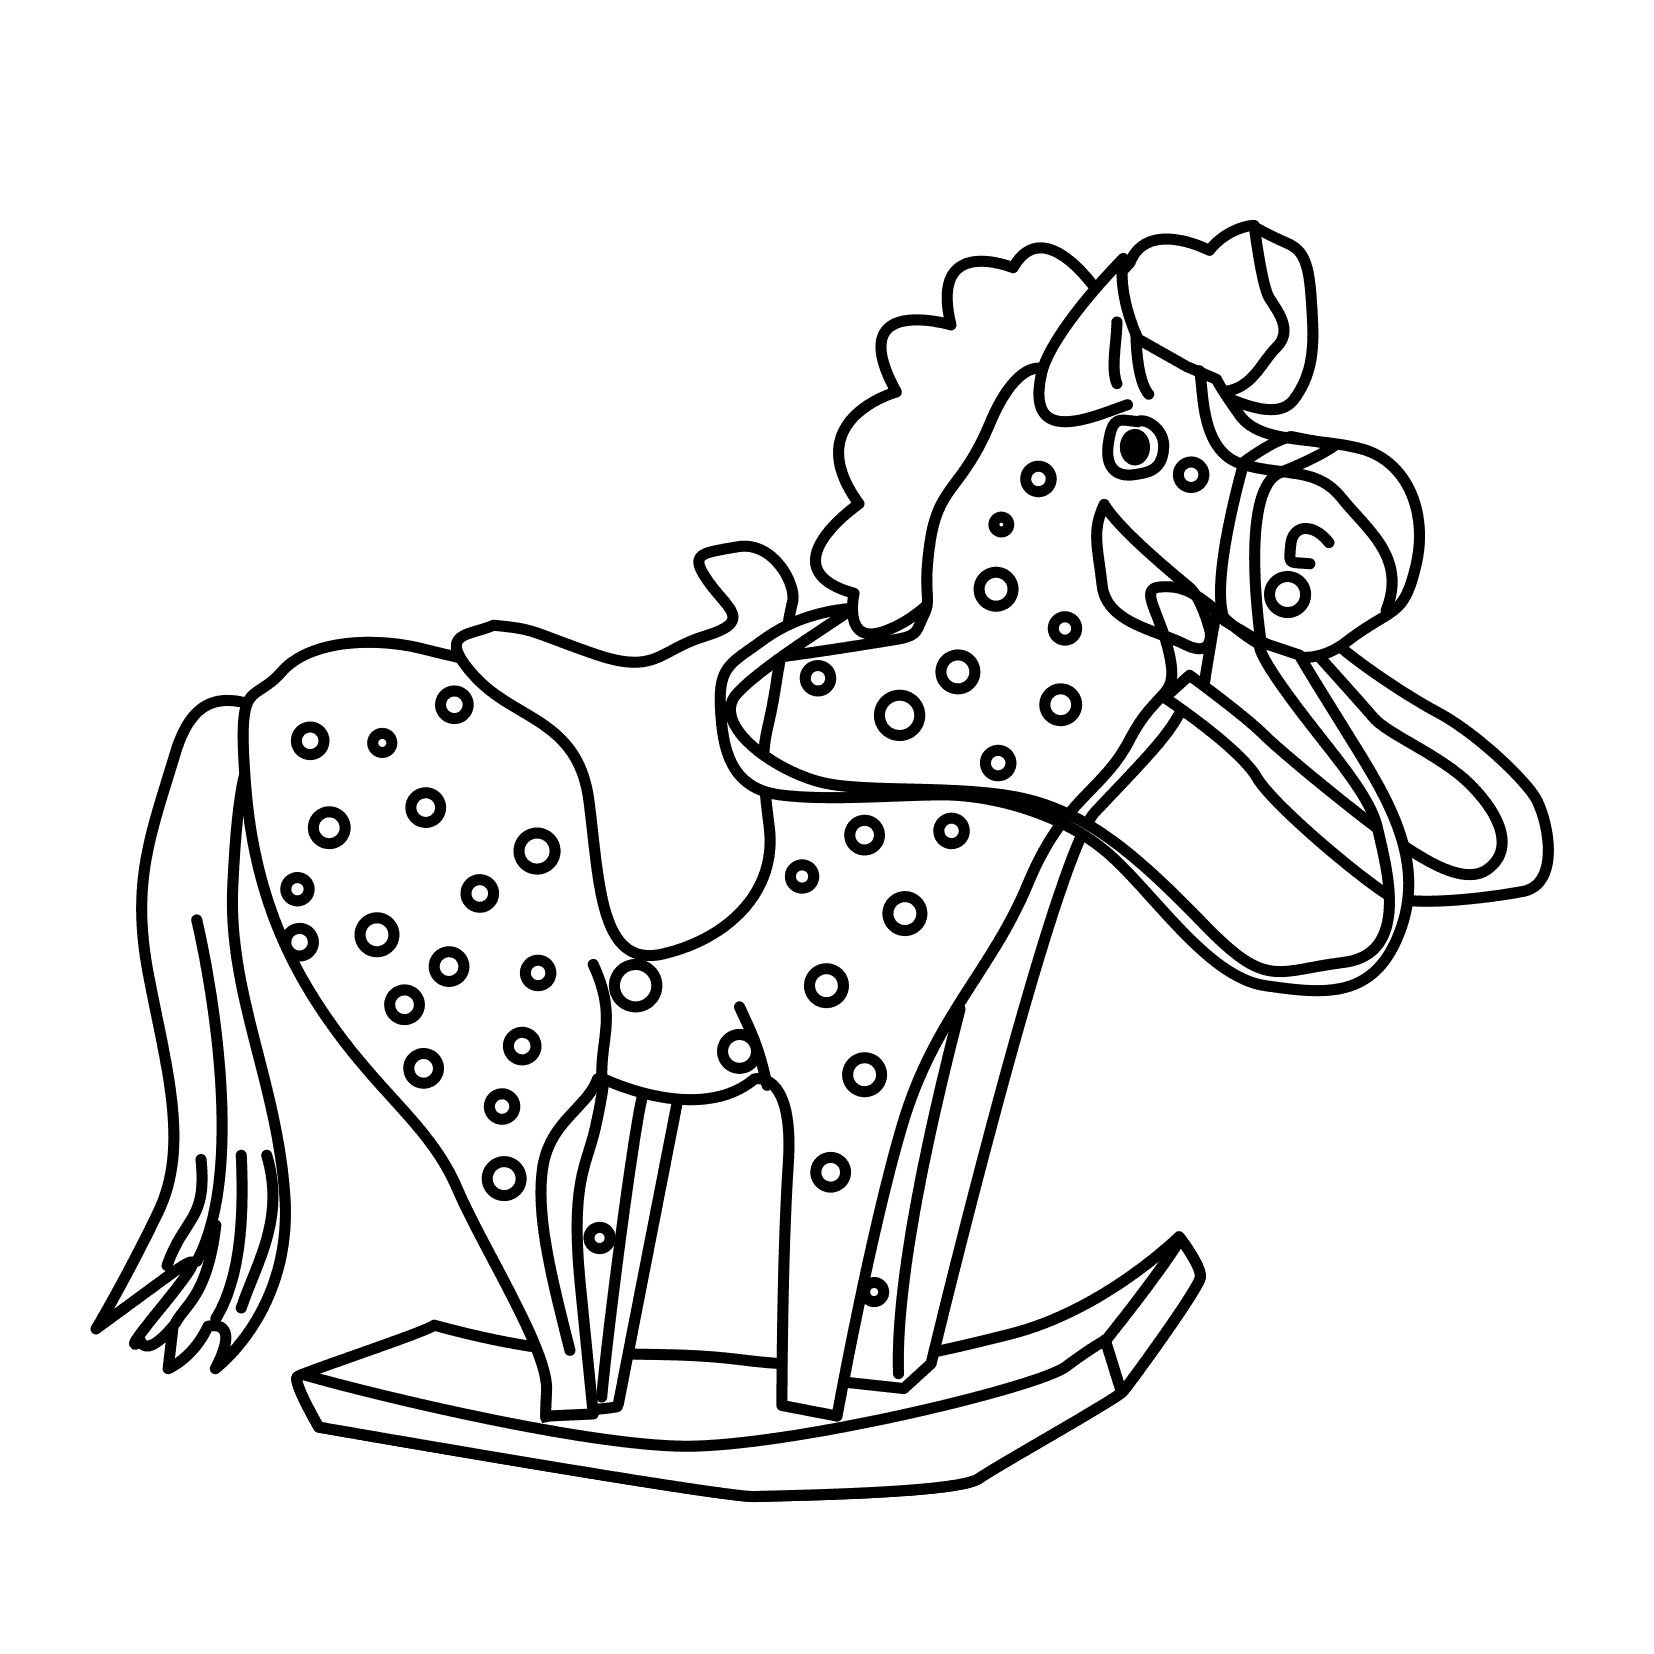 Coloring pages various - free downloads